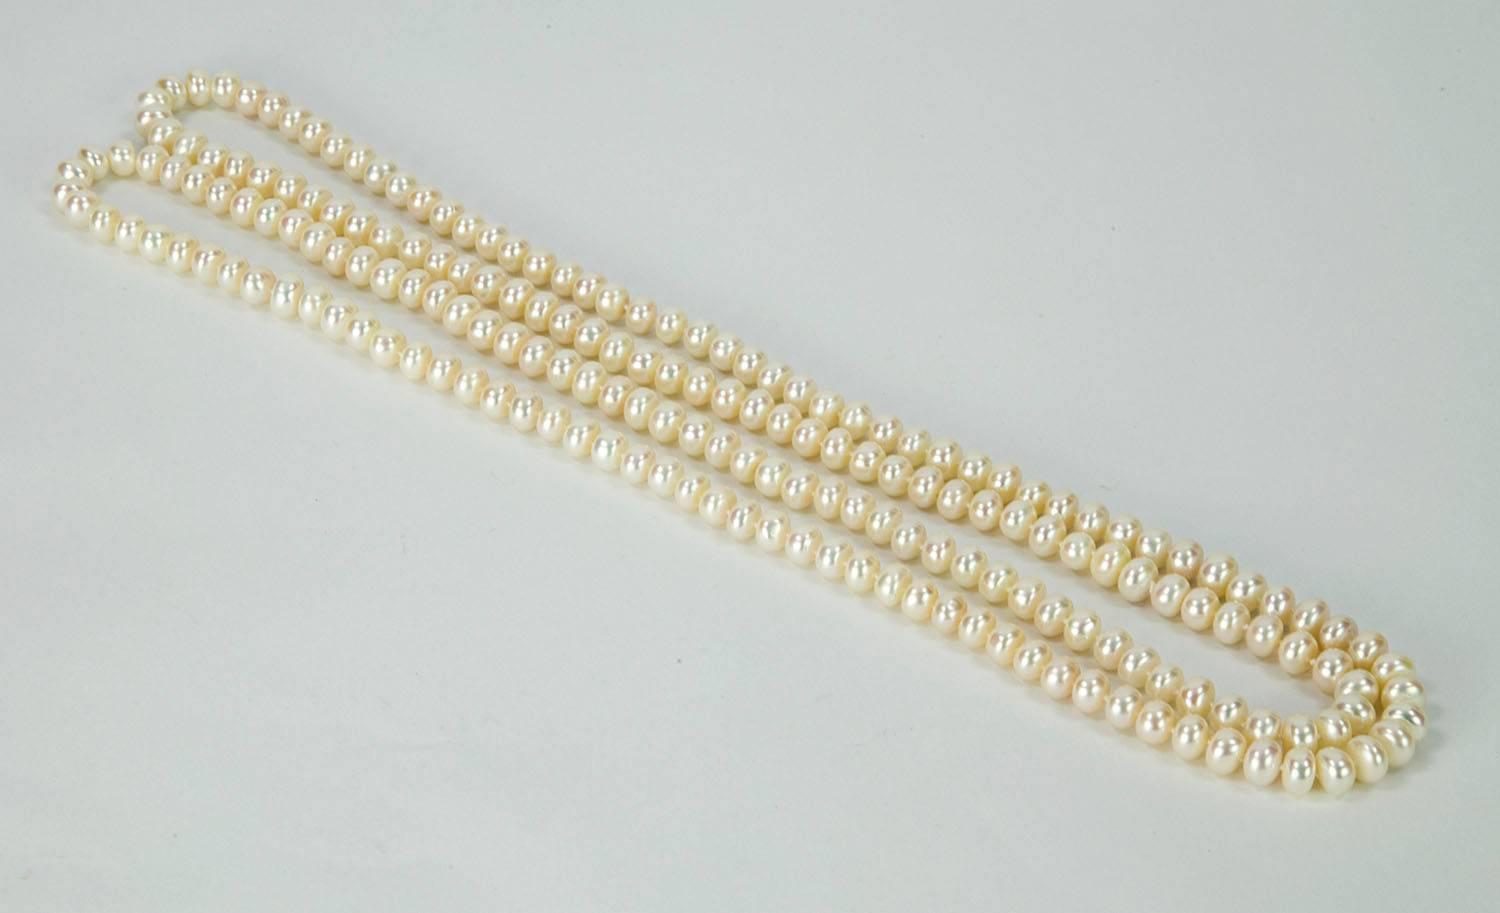 Classic Long White Pearl Necklace For Sale at 1stdibs